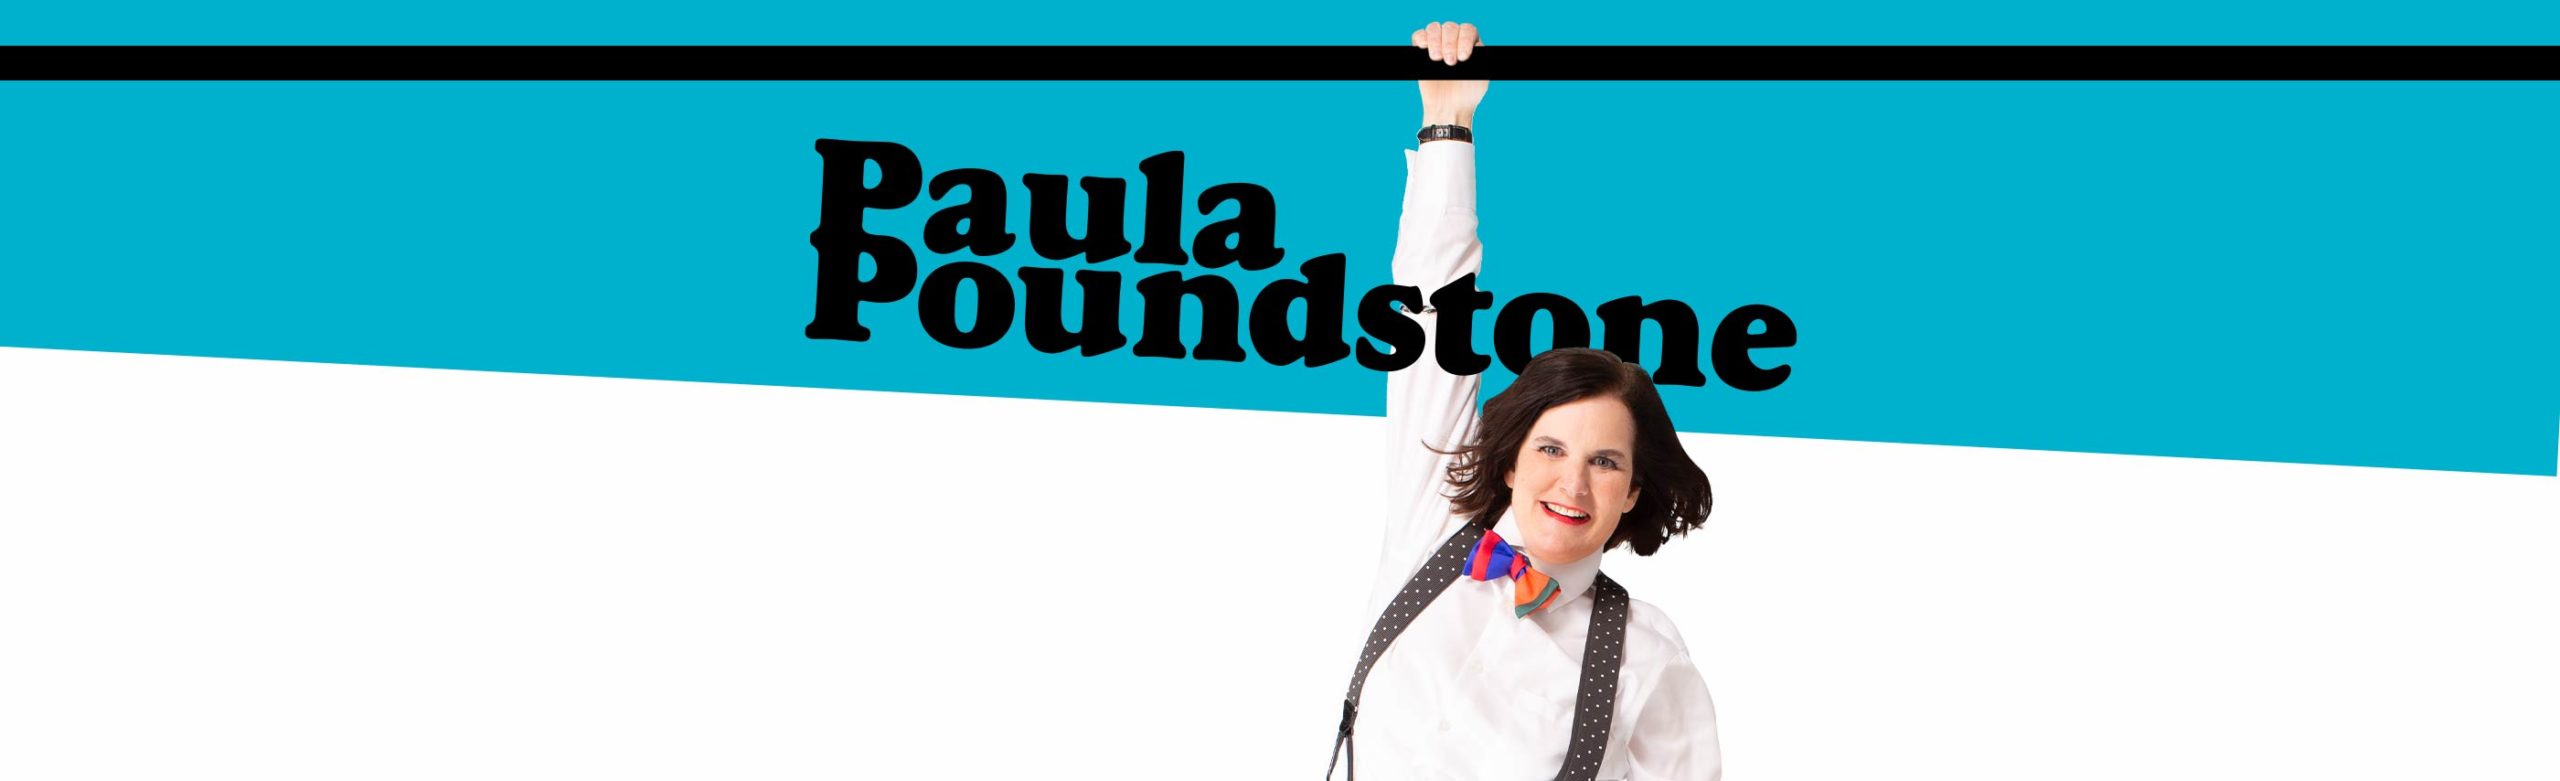 Win Tickets to Paula Poundstone at The Wilma Image